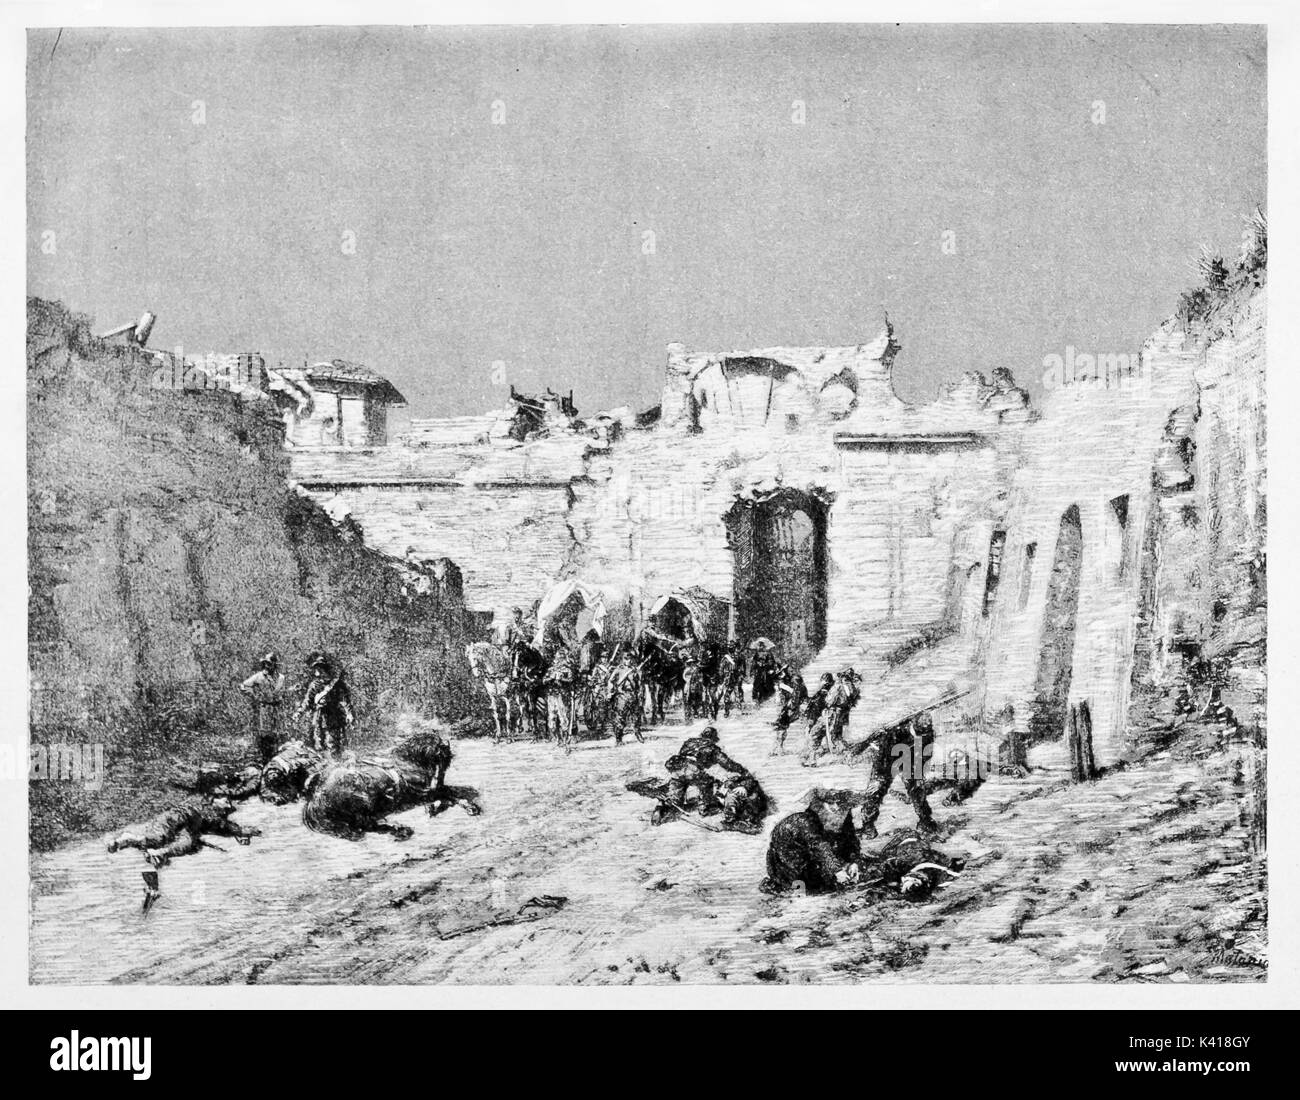 Ancient rough illustration of a city destroyed after a battle and an army walking trough the ruins and dead people. Porta San Pancrazio Rome in 1849. By Matania on Garibaldi e i Suoi Tempi Milan 1884 Stock Photo